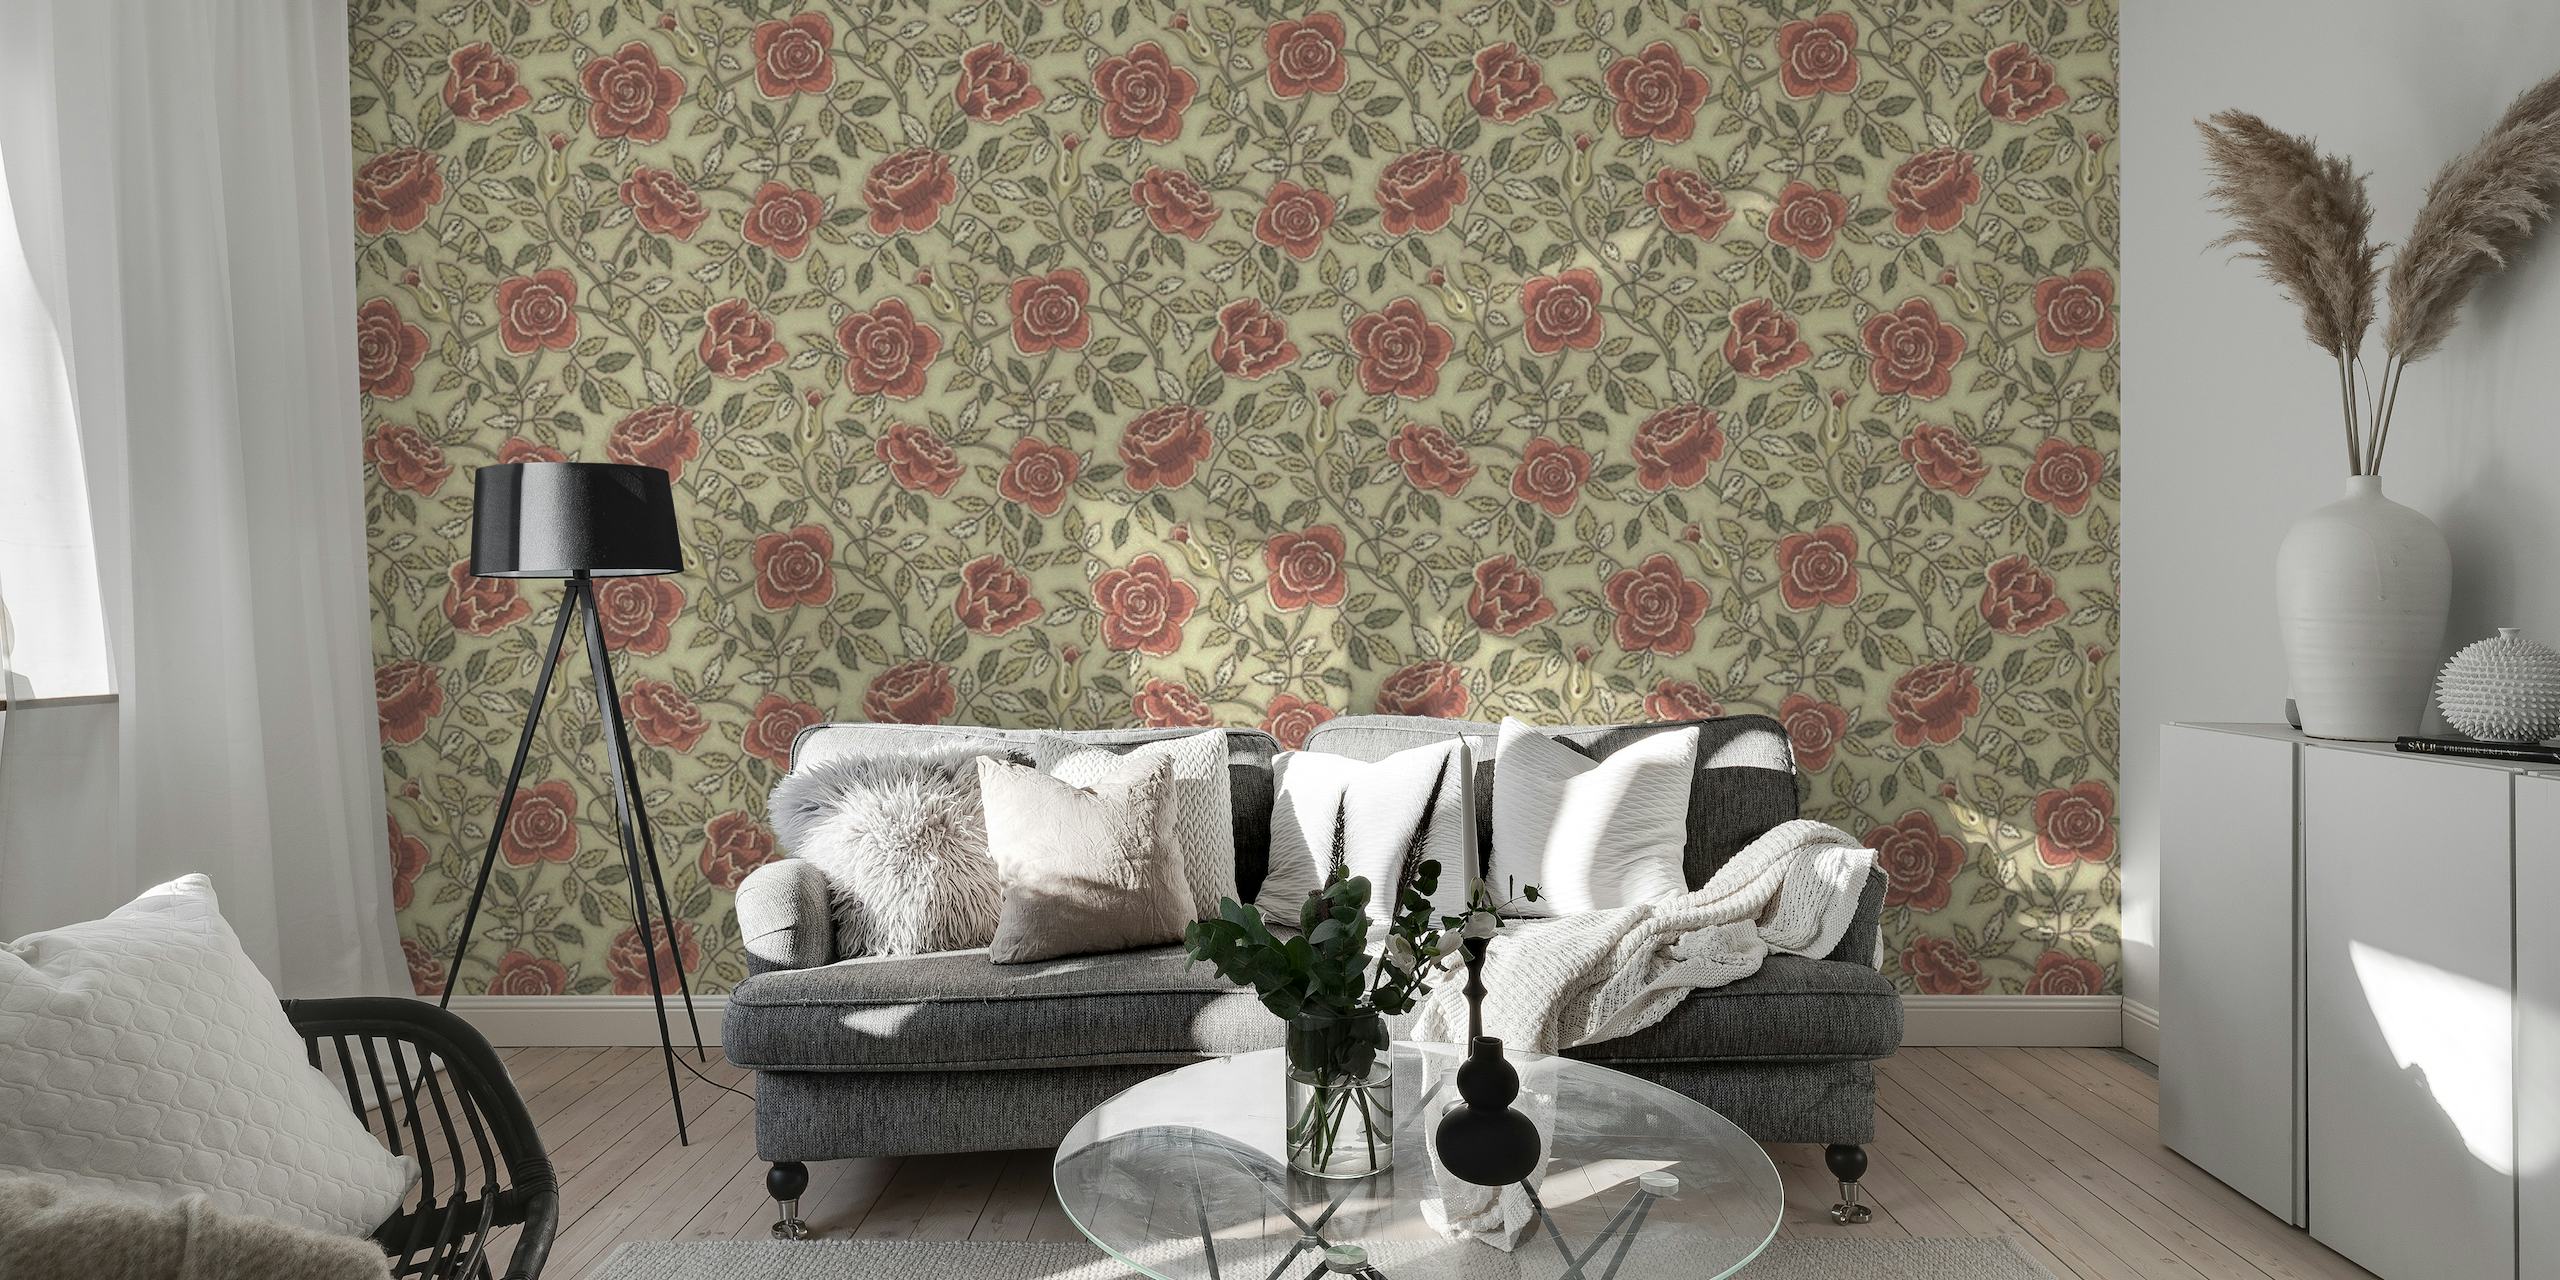 Vintage-style wall mural featuring an elegant pattern of blooming roses set against a muted background.